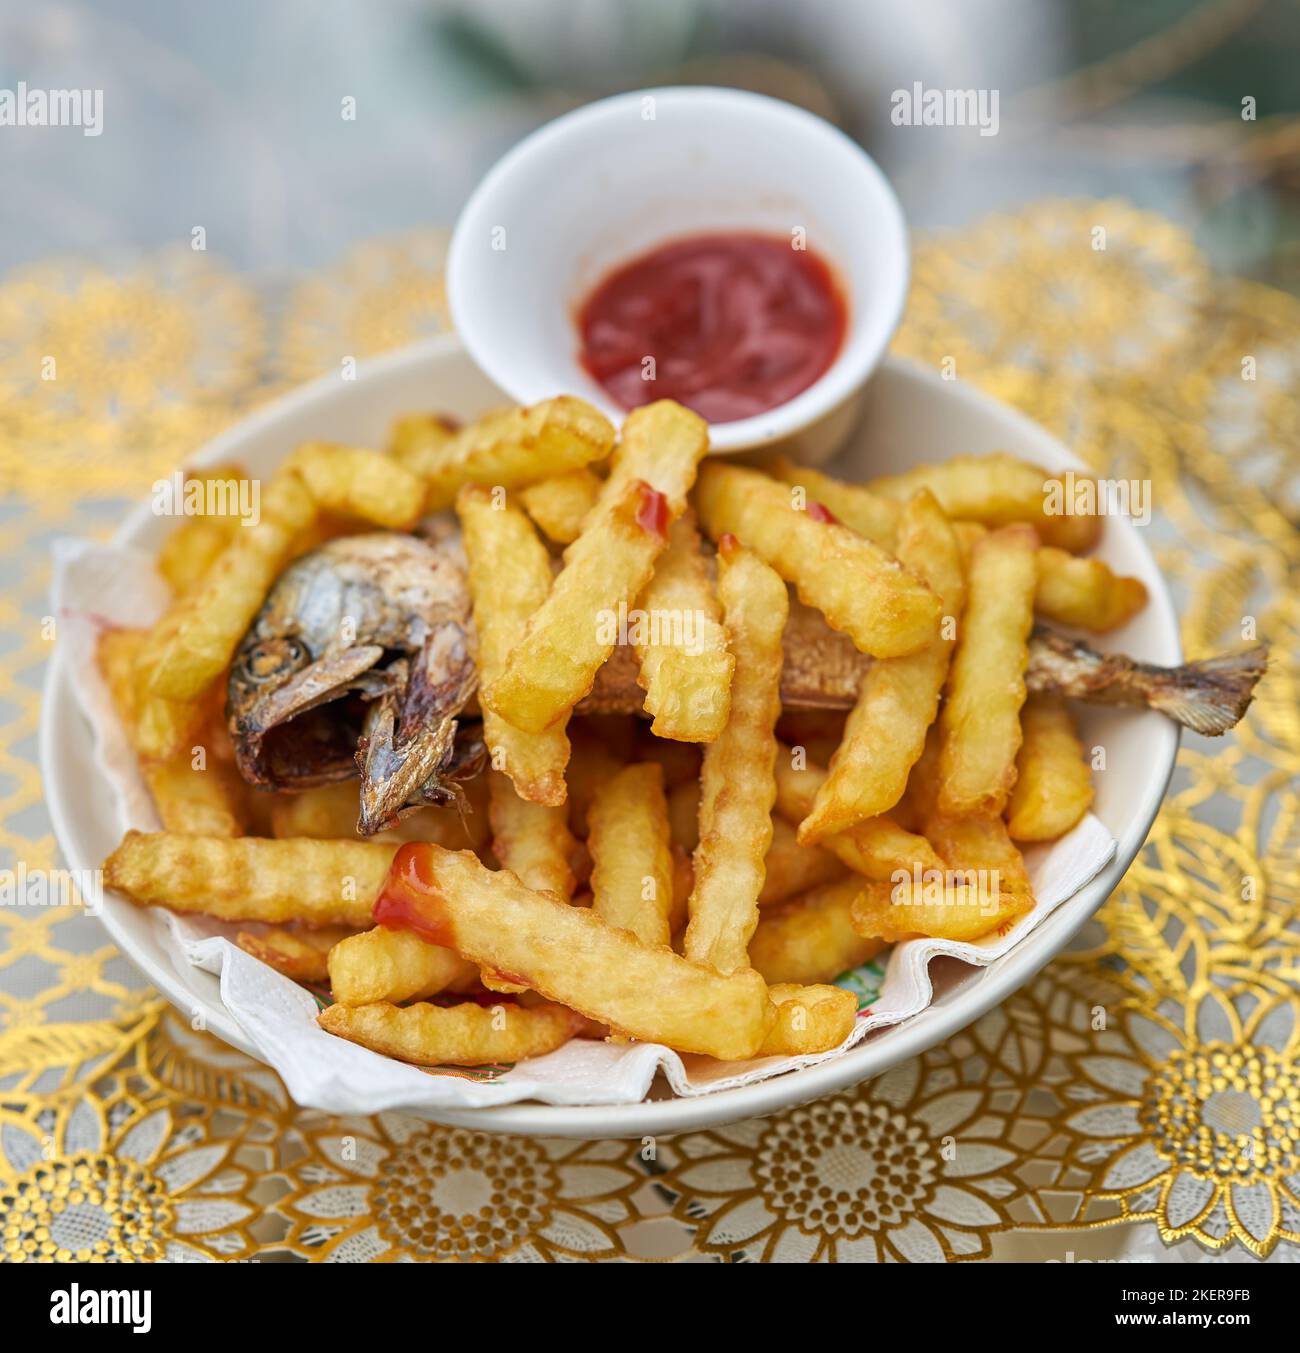 A plate of fish and chips with tomato ketchup. Stock Photo